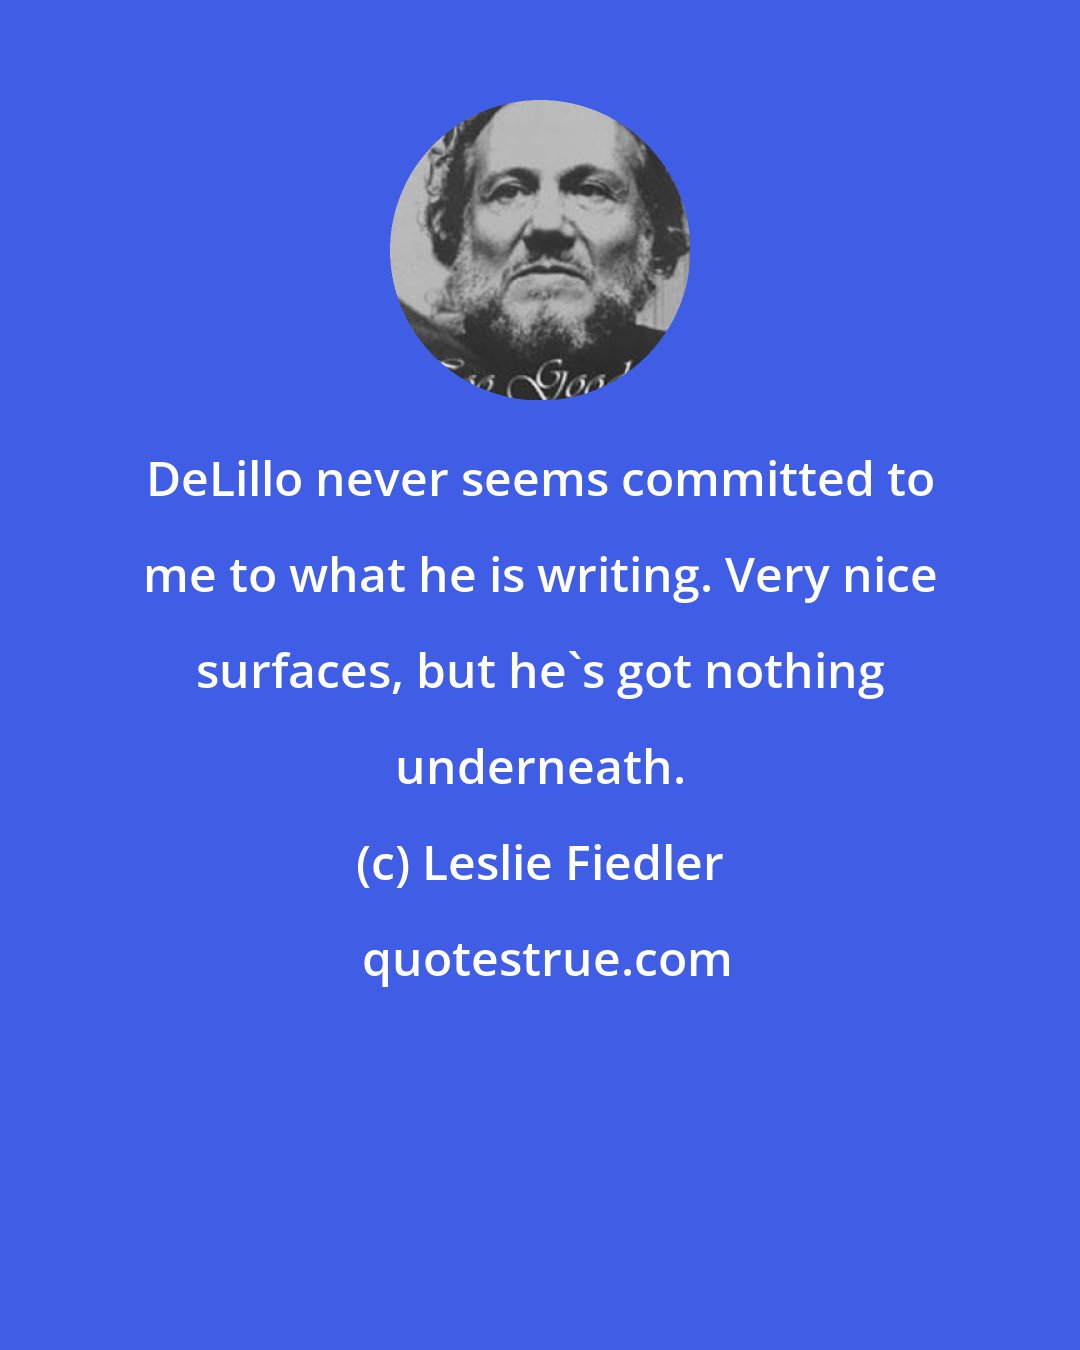 Leslie Fiedler: DeLillo never seems committed to me to what he is writing. Very nice surfaces, but he's got nothing underneath.